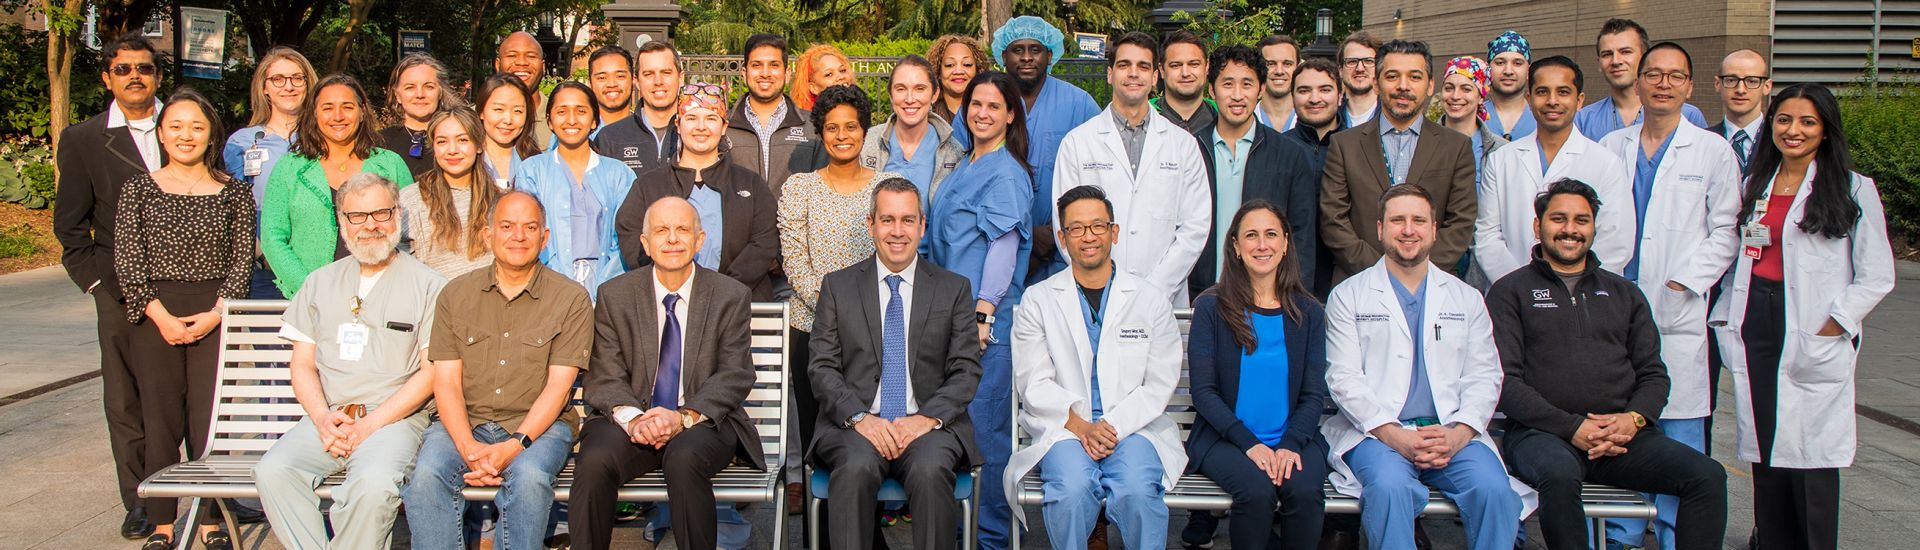 Anesthesiology Group Photo